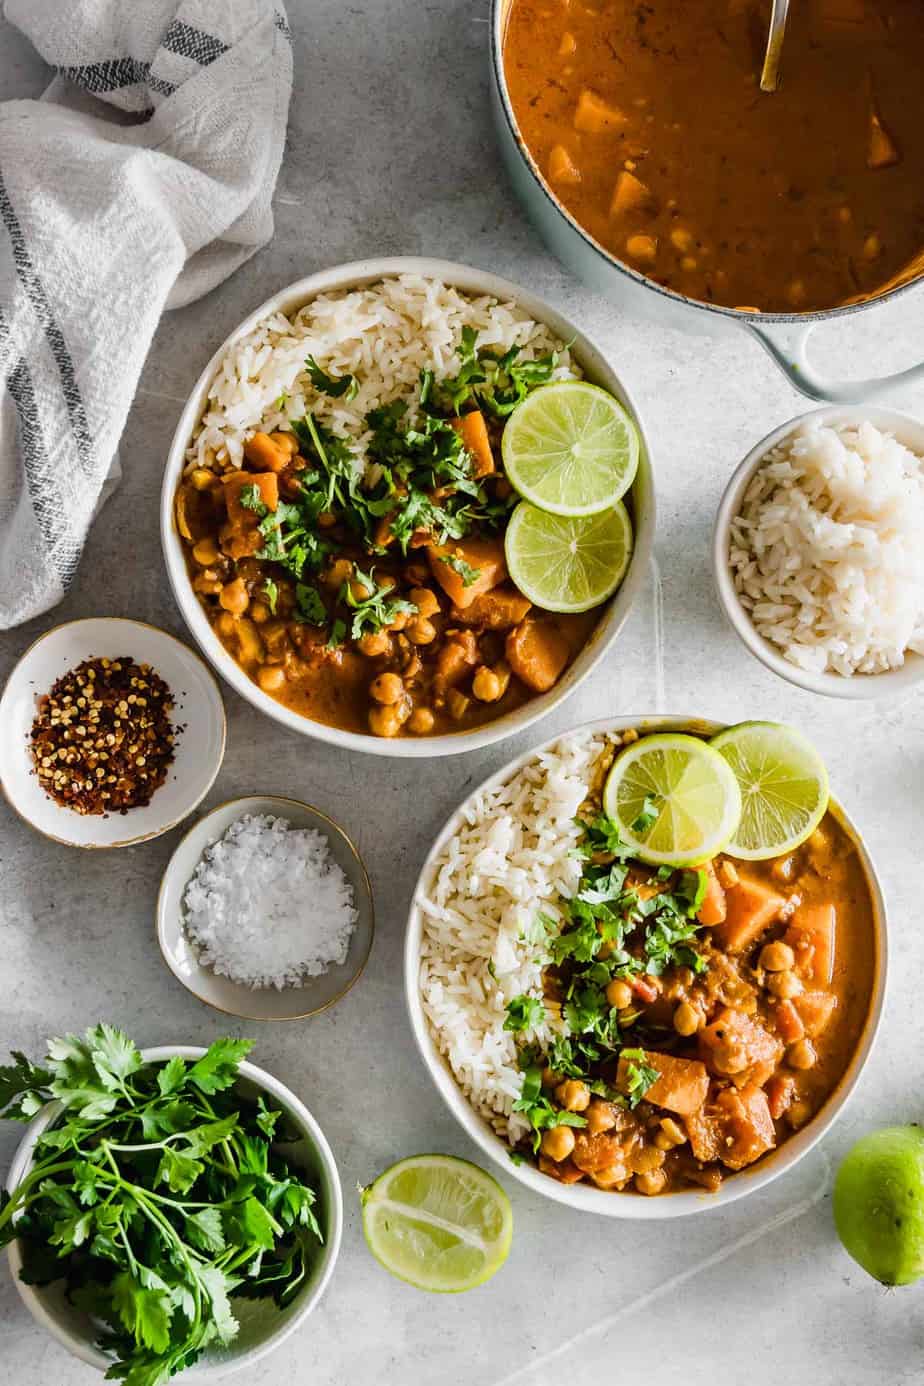  Vegan Chickpea Pumpkin Curry with limes and fresh herbs.